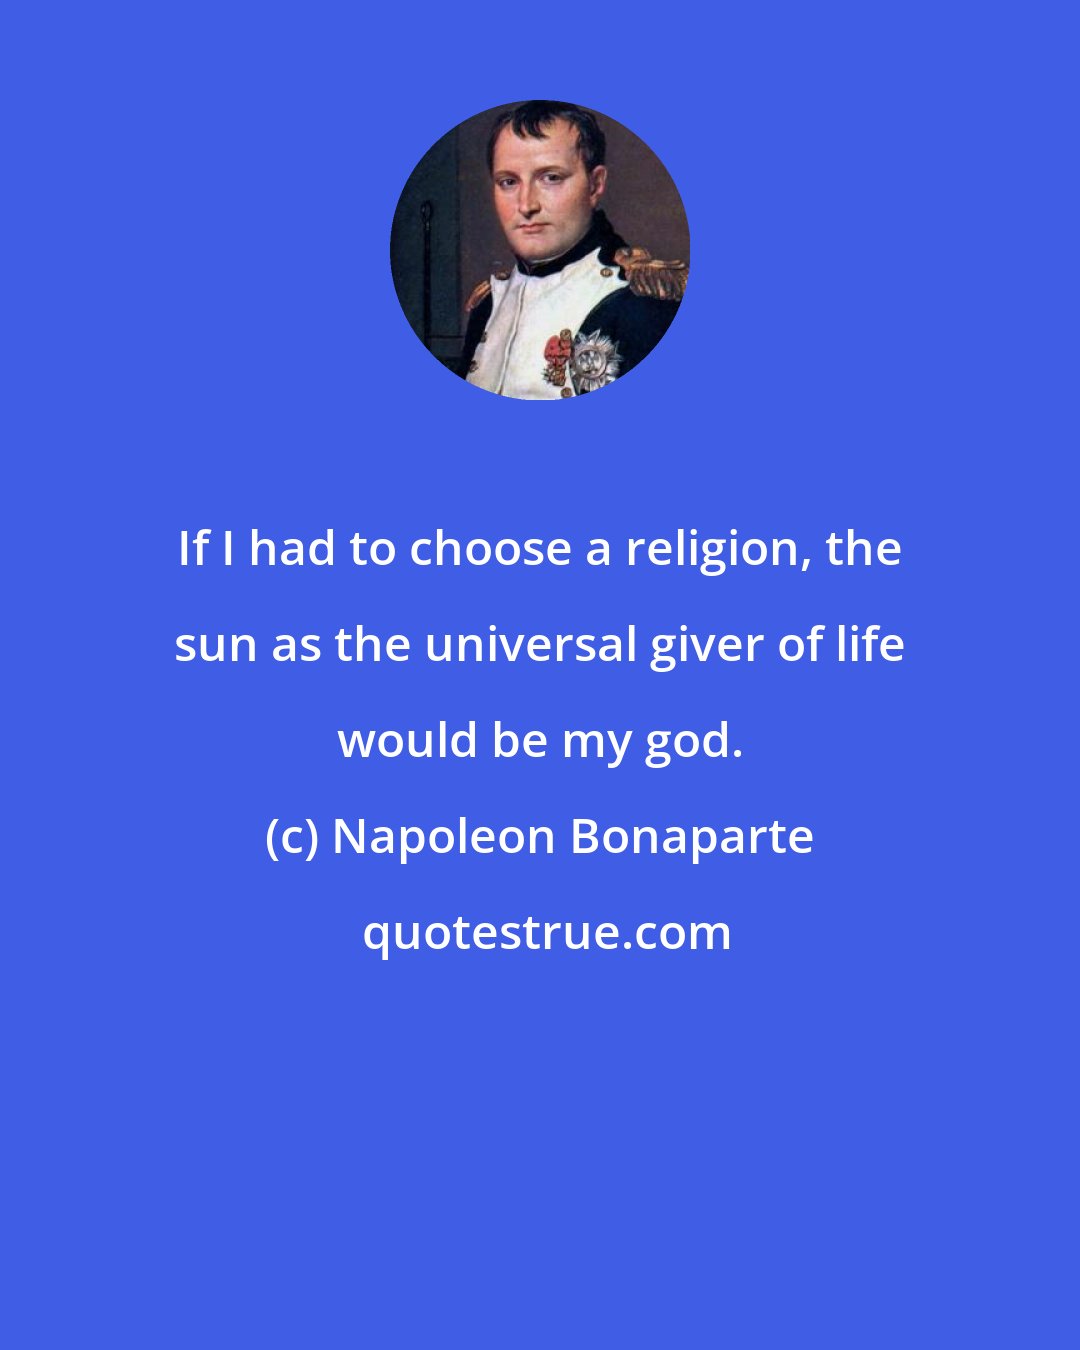 Napoleon Bonaparte: If I had to choose a religion, the sun as the universal giver of life would be my god.